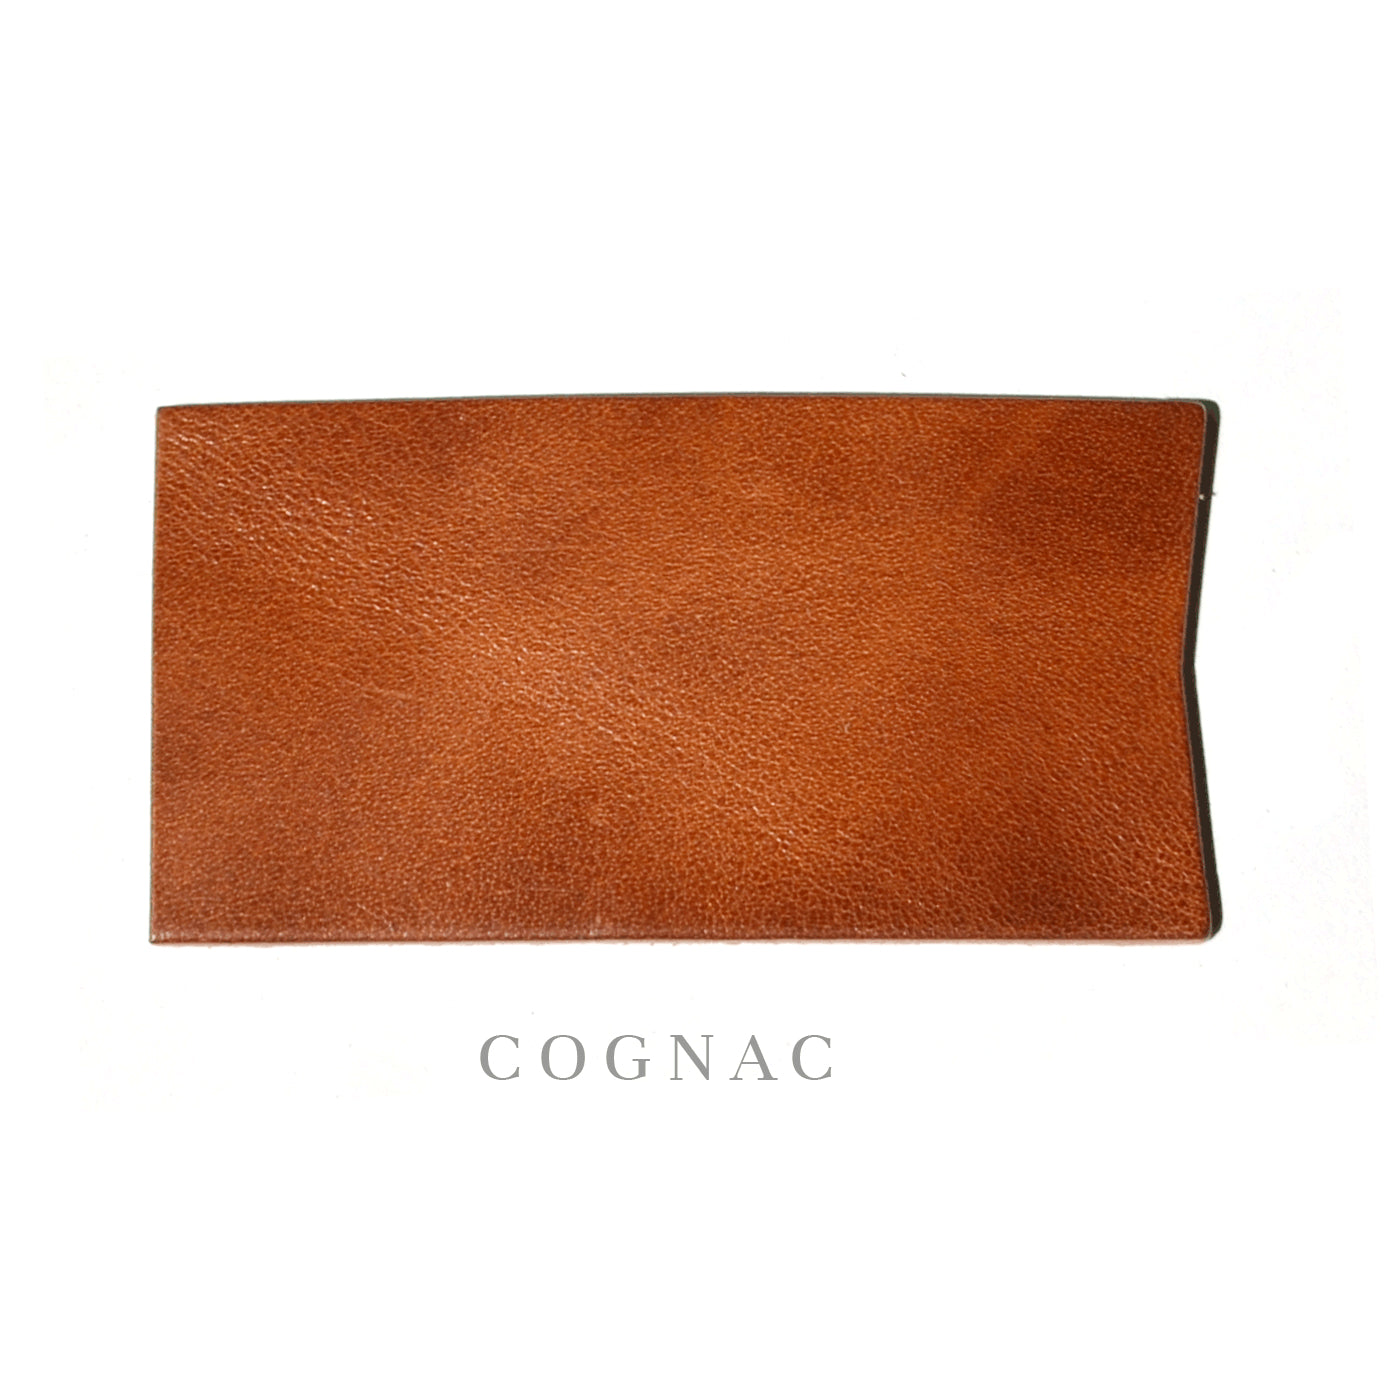 A rectangular-like swatch of cognac color leather. 